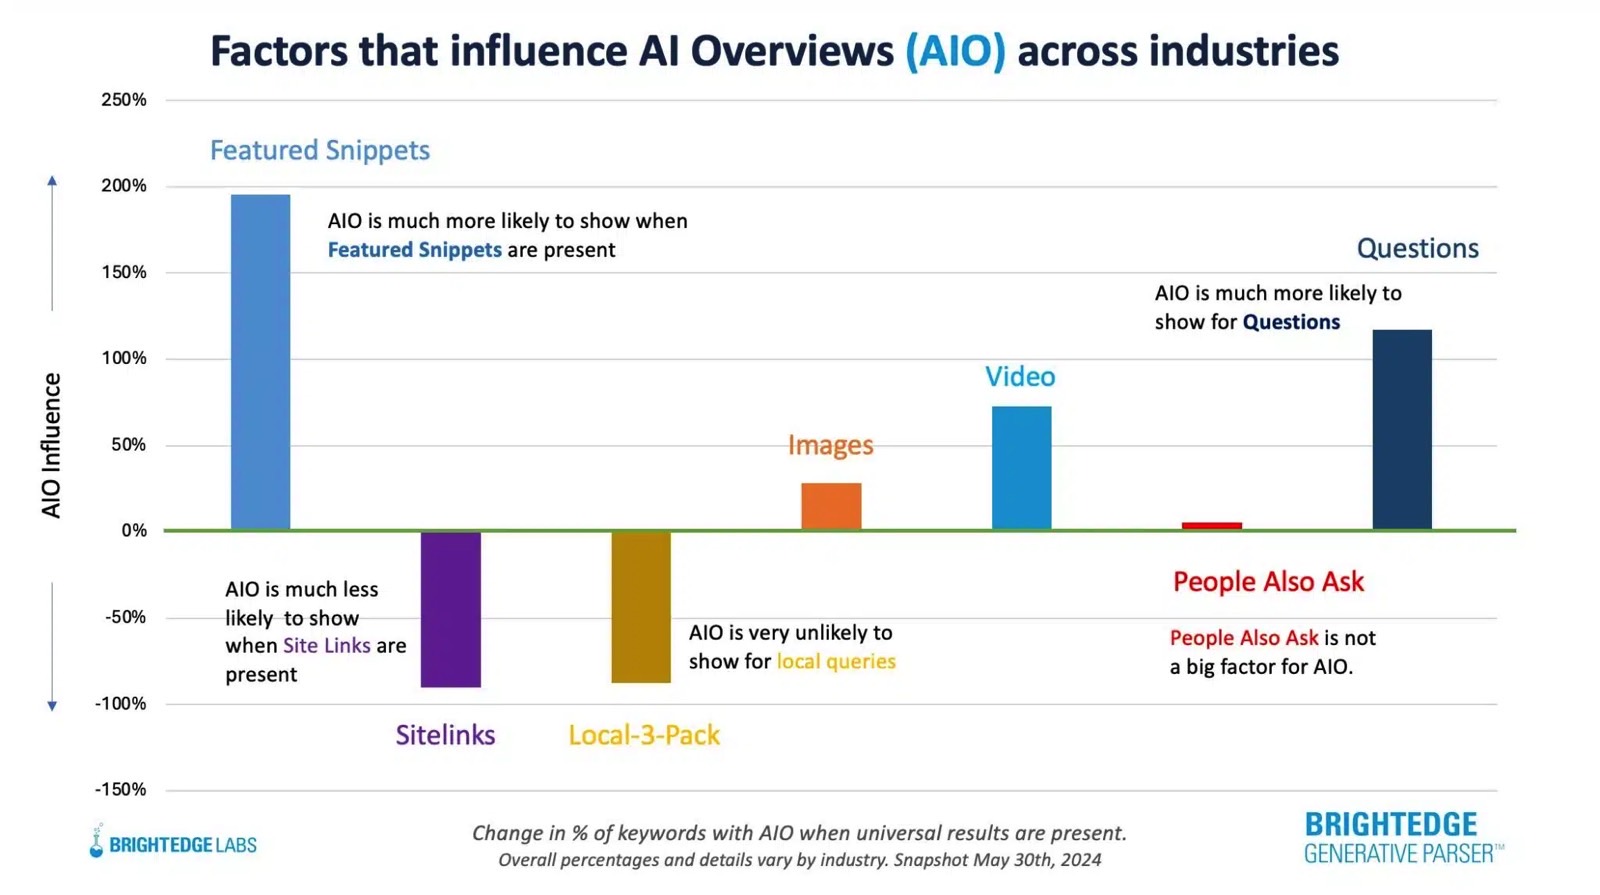 AI Overviews are more likely to appear for certain Google Search queries than others.